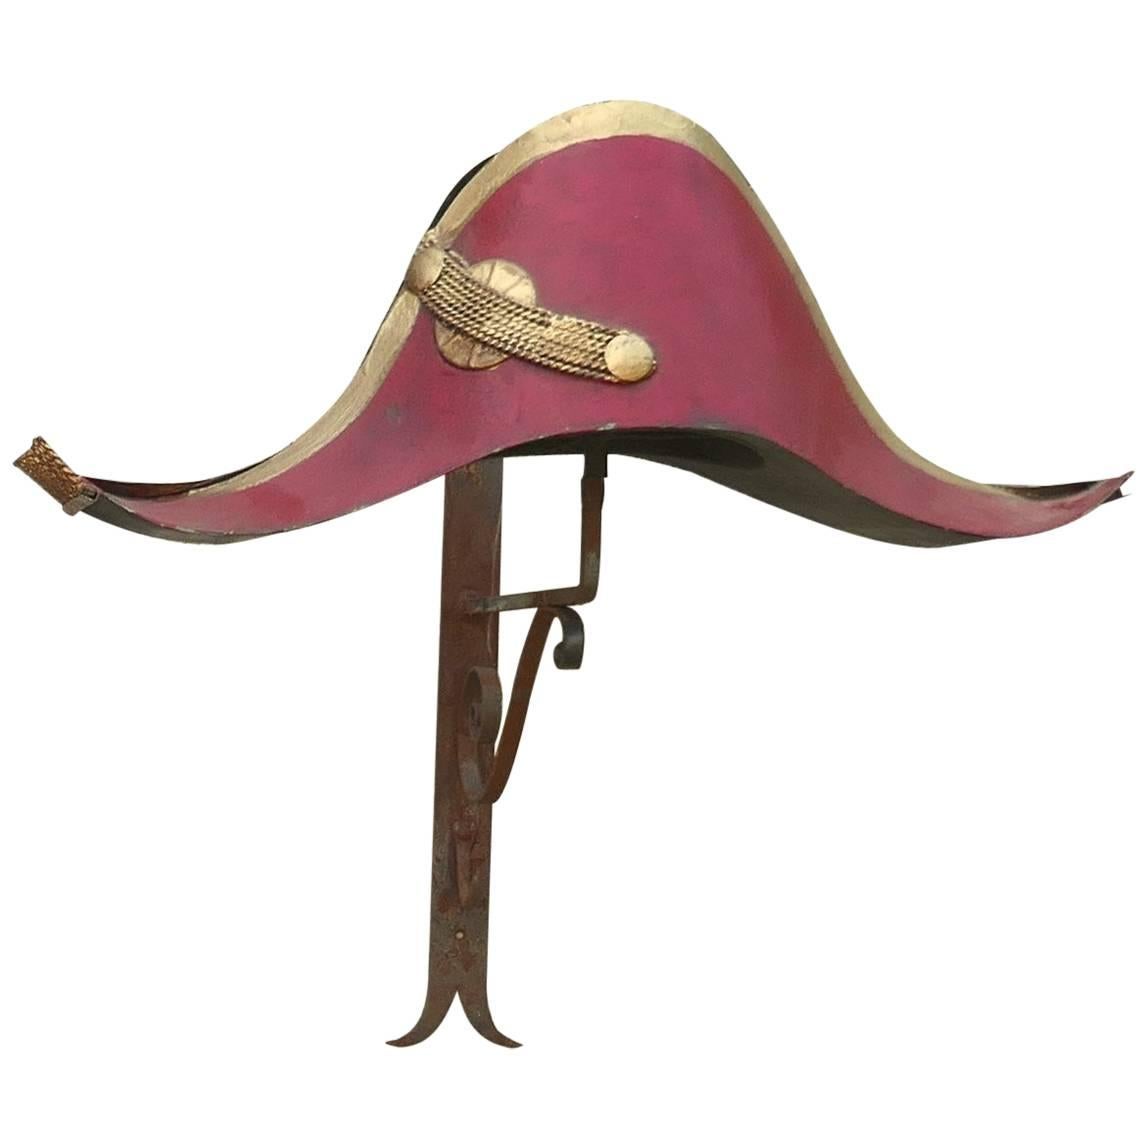 Very Rare Mid-19th Century French Bicorn Toleware Hat Shop Trade Sign